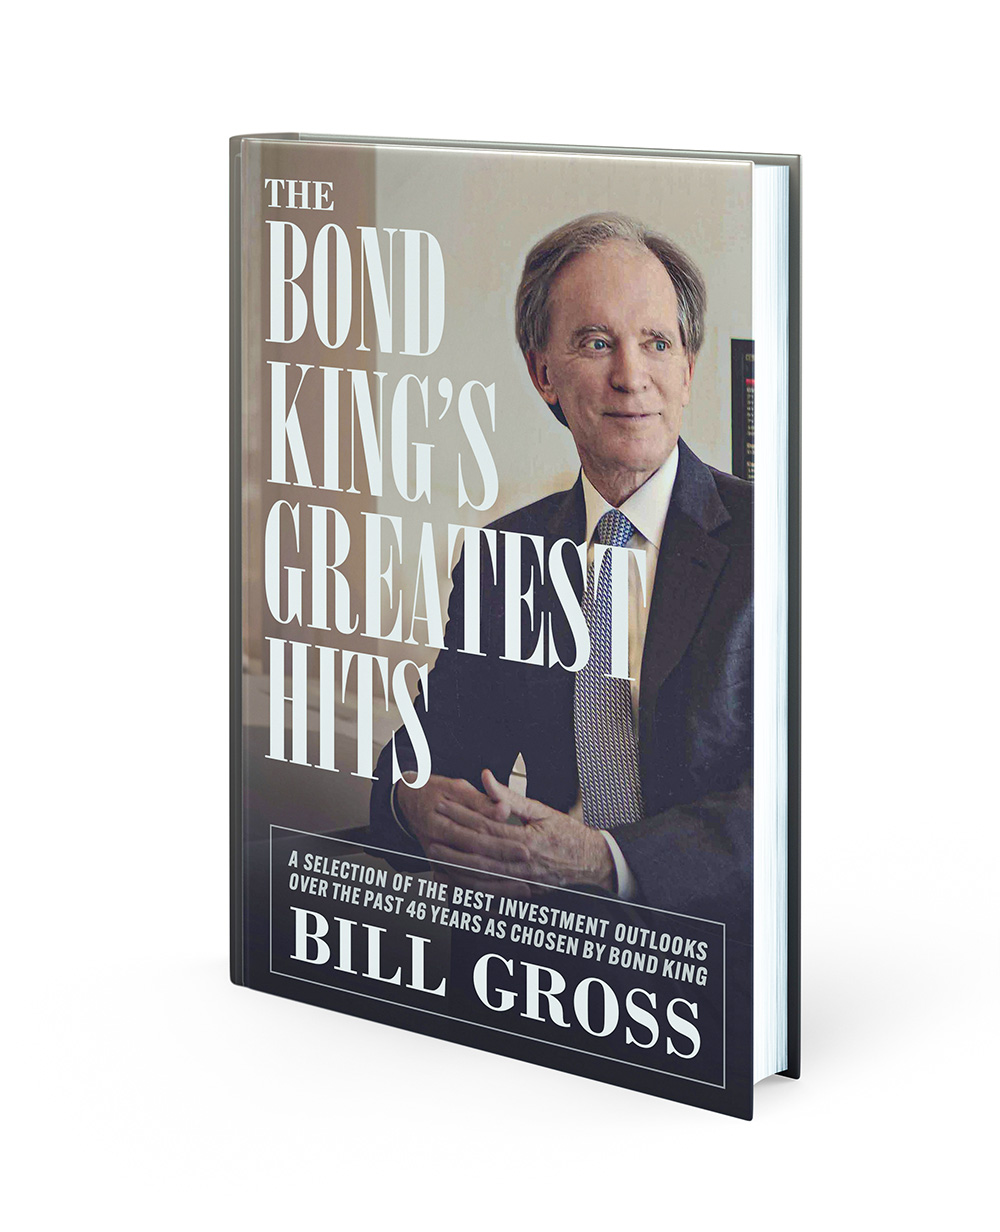 Bill Gross Greatest Hits book cover